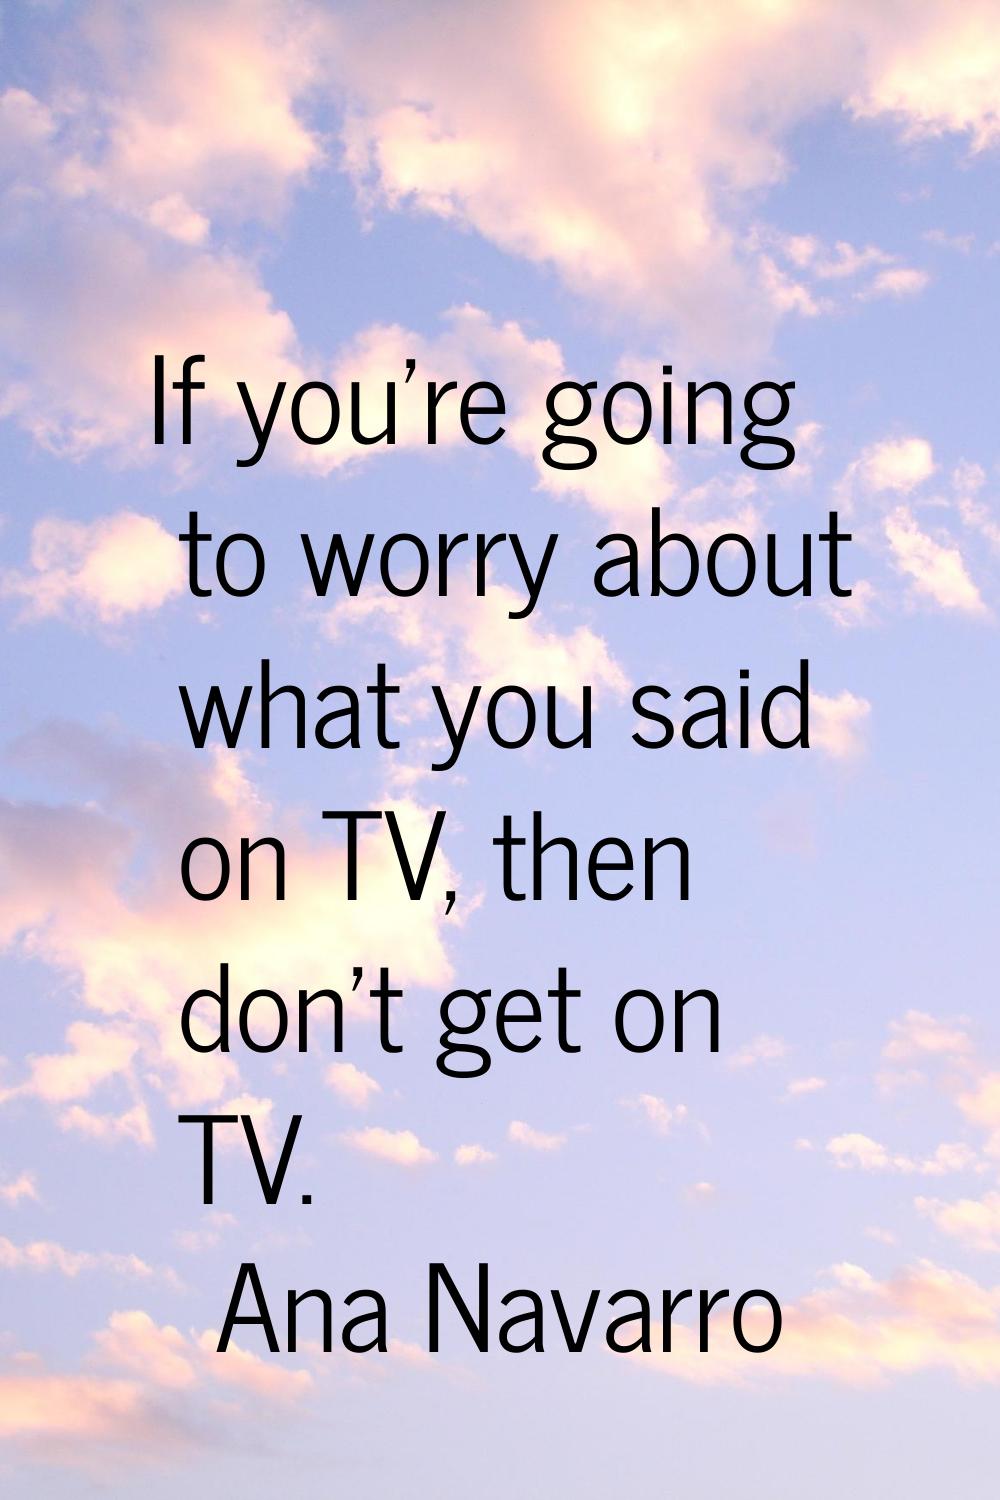 If you're going to worry about what you said on TV, then don't get on TV.